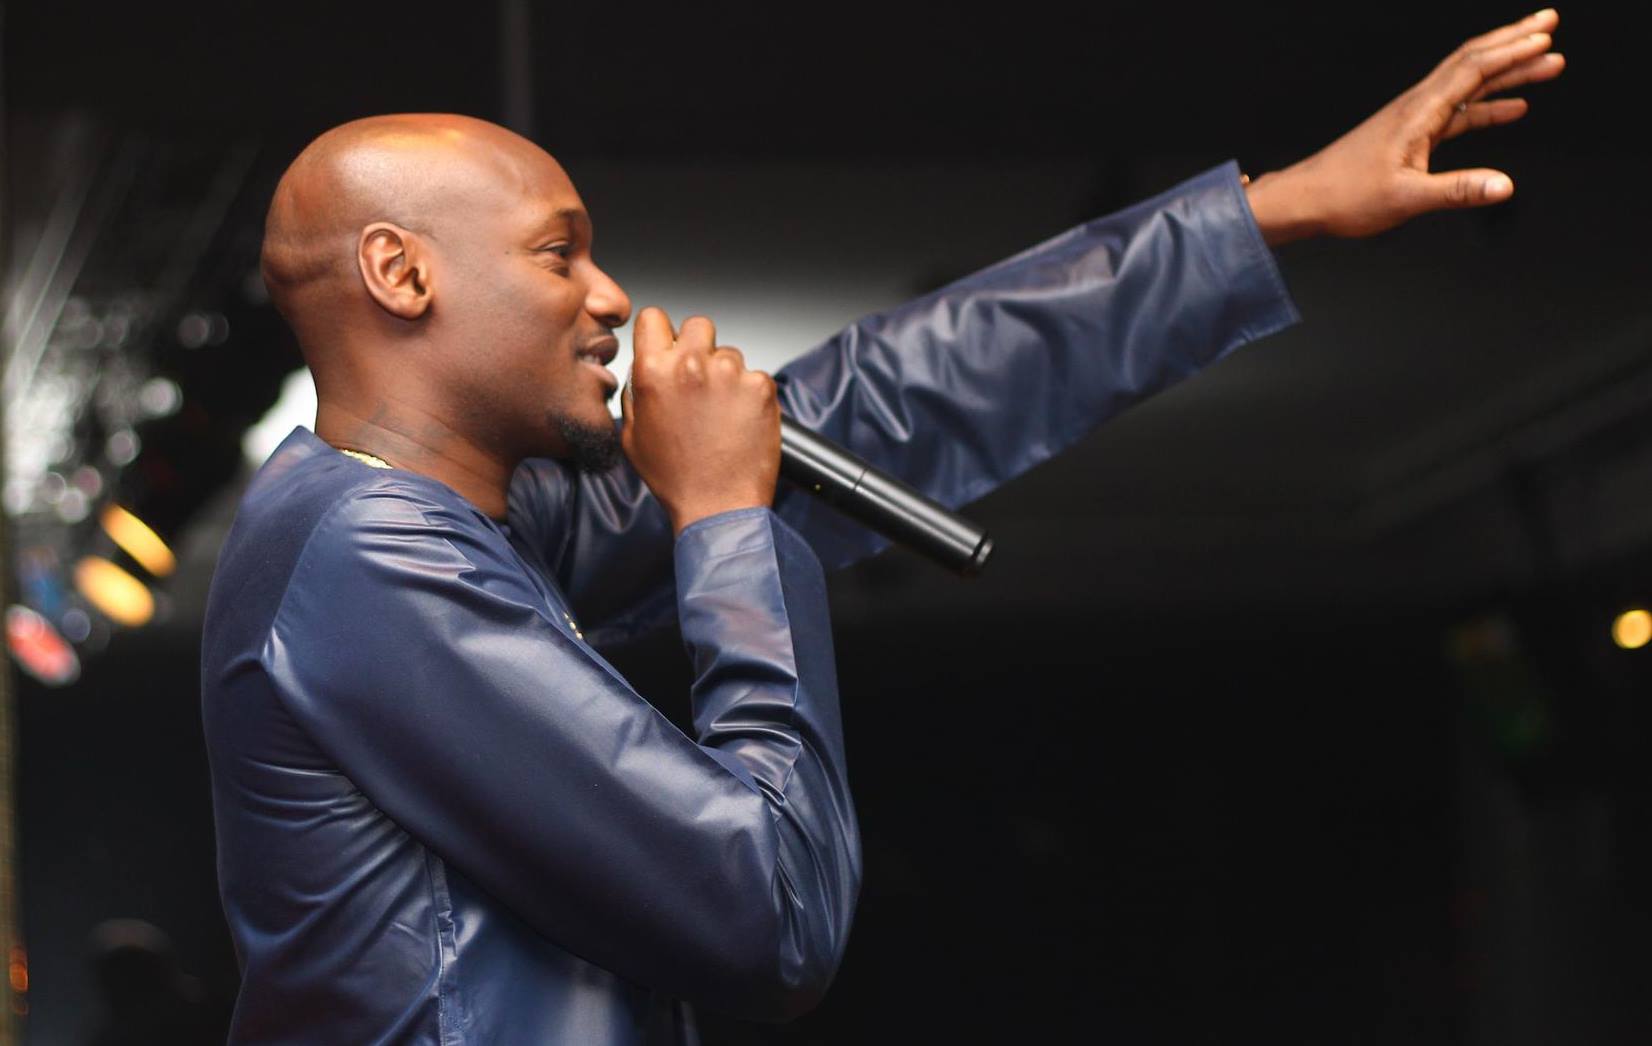 2face speaks about having humility as an entertainer